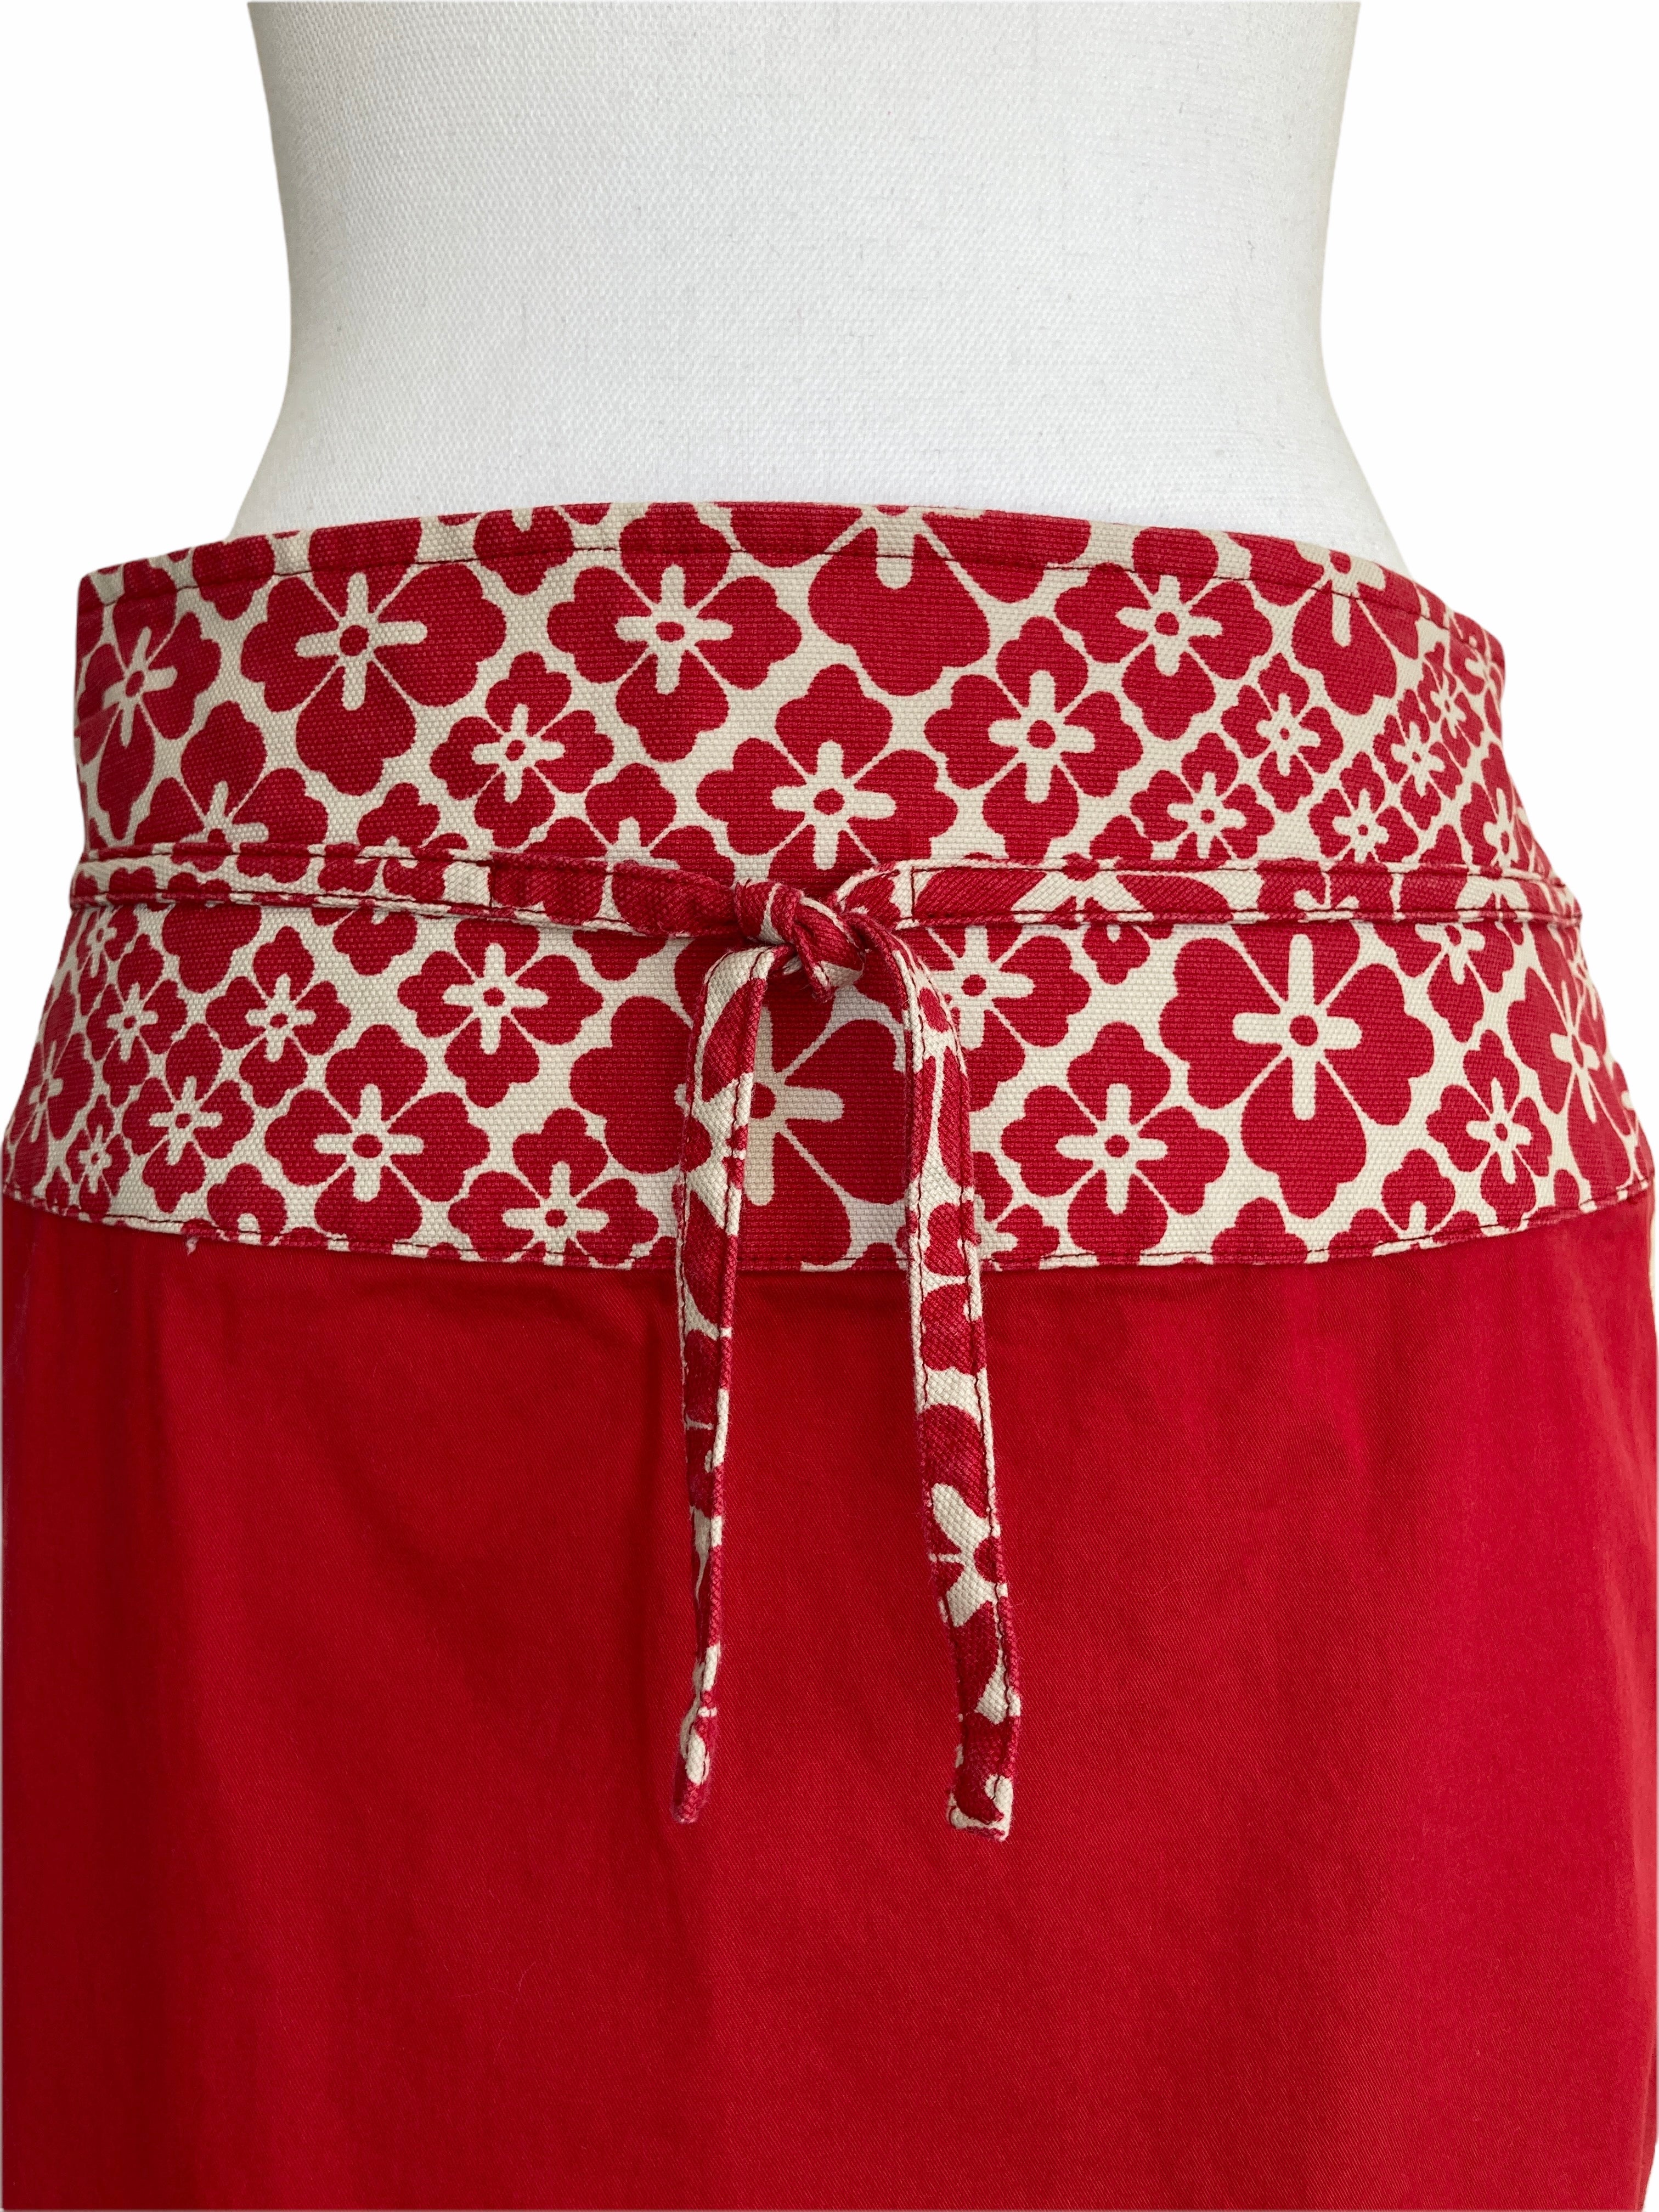 Moschino Jeans Red Skirt, 10